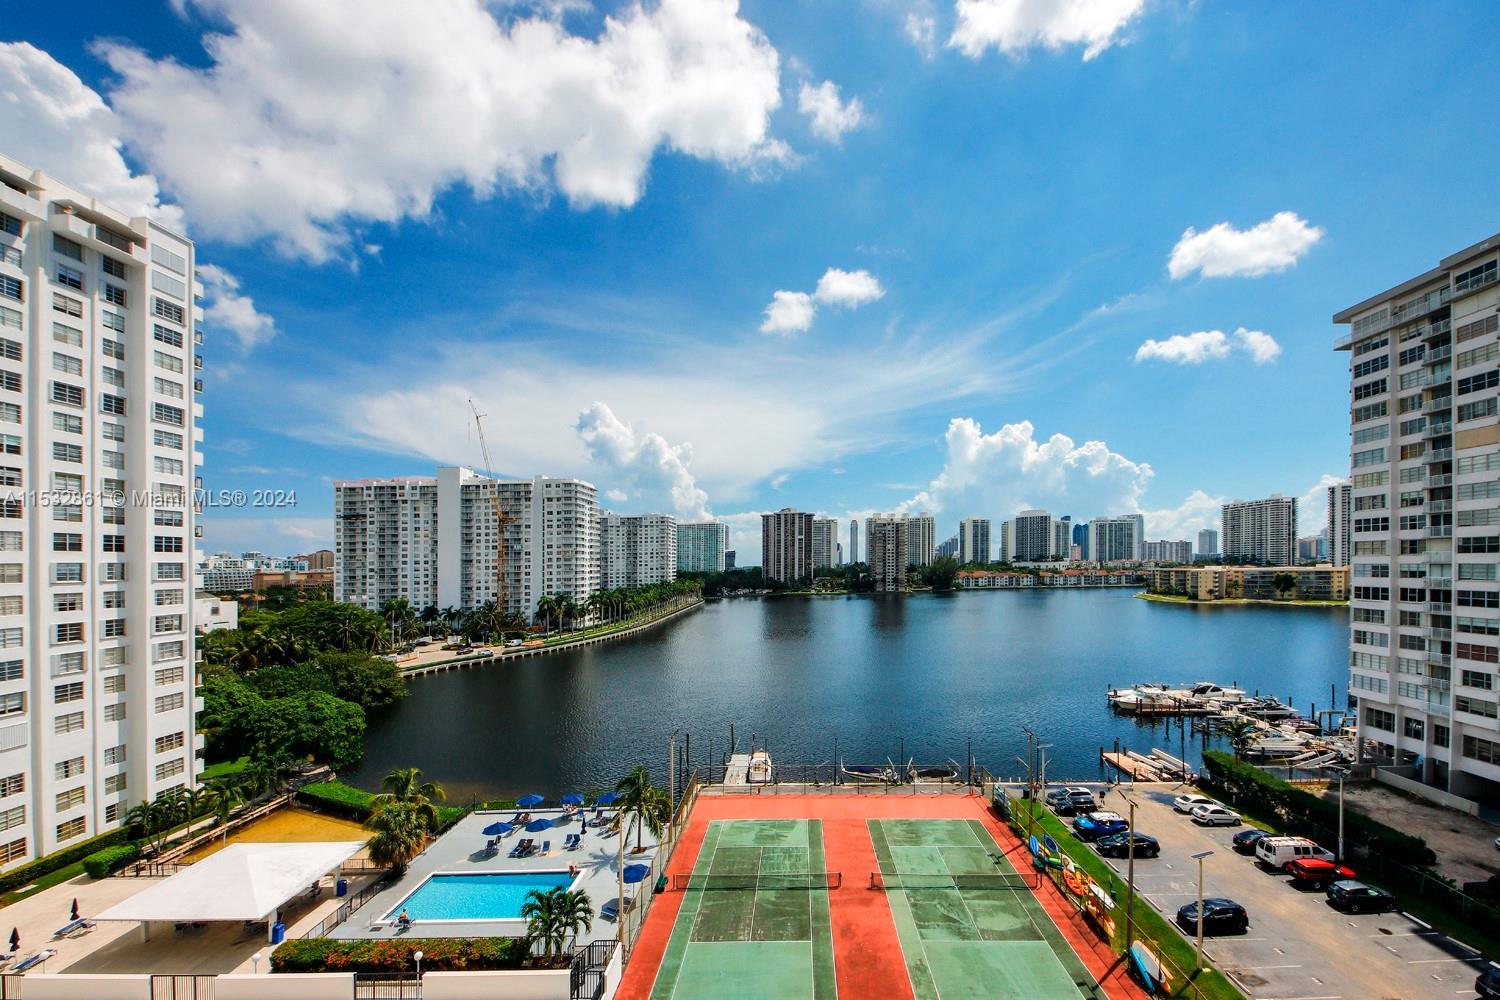 Welcome to your dream condo in the heart of Aventura! This stunning condo boasts 2 bedrooms/2 bathro